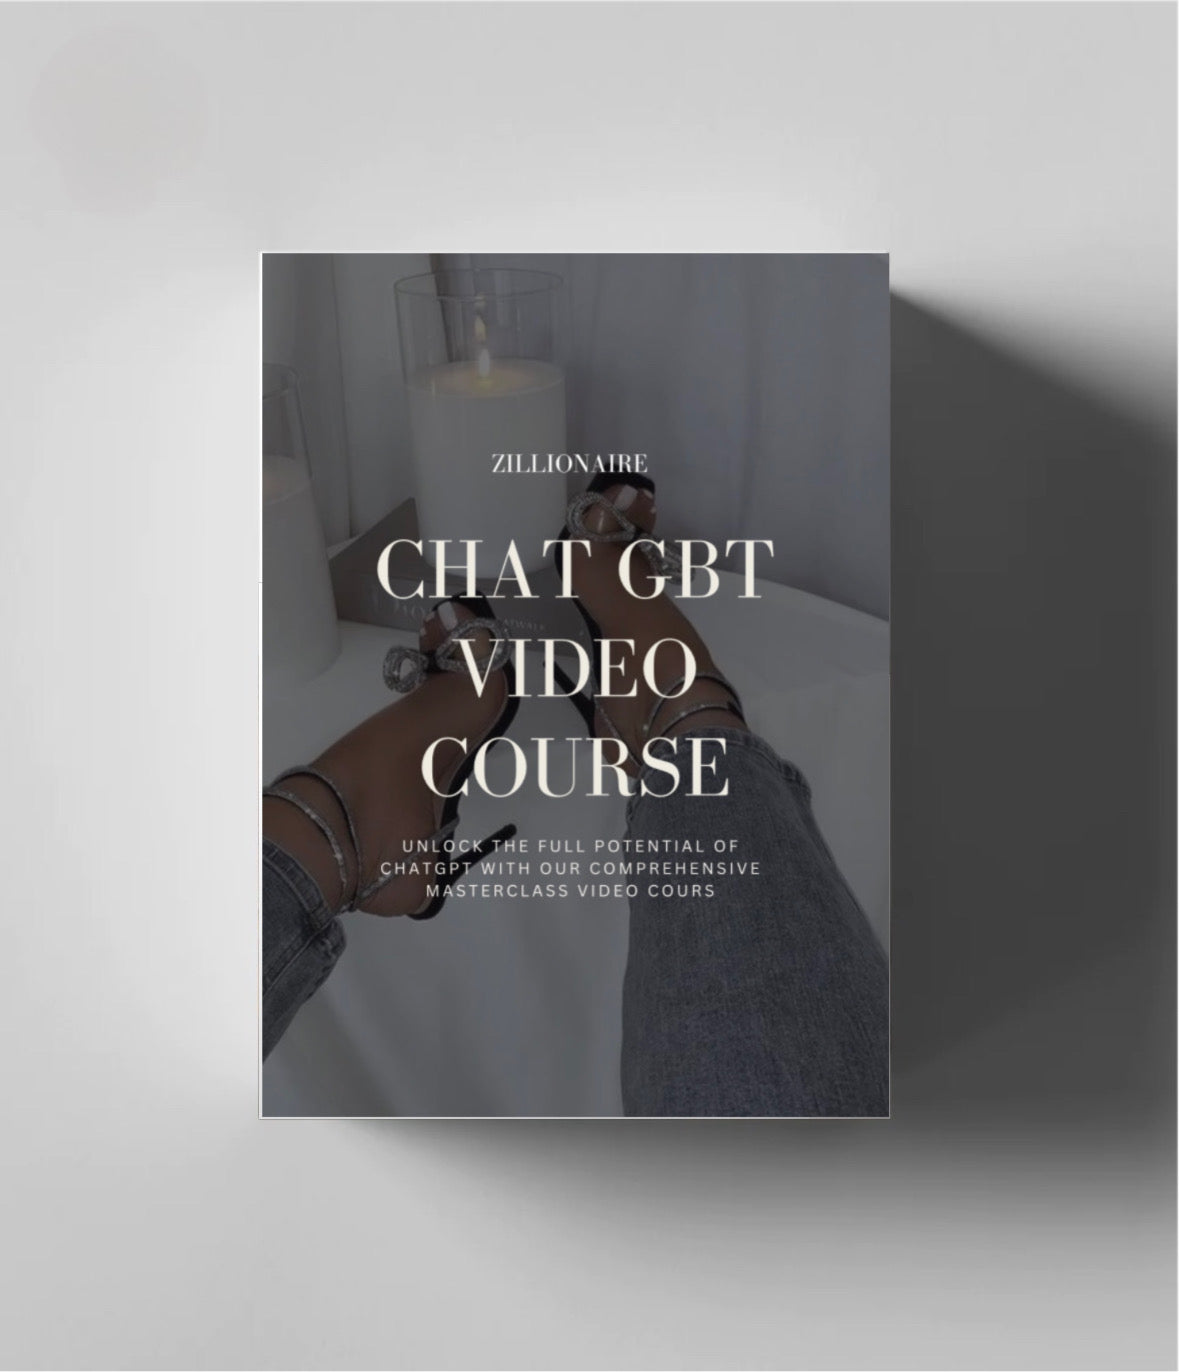 CHAT GPT Masterclass Video course